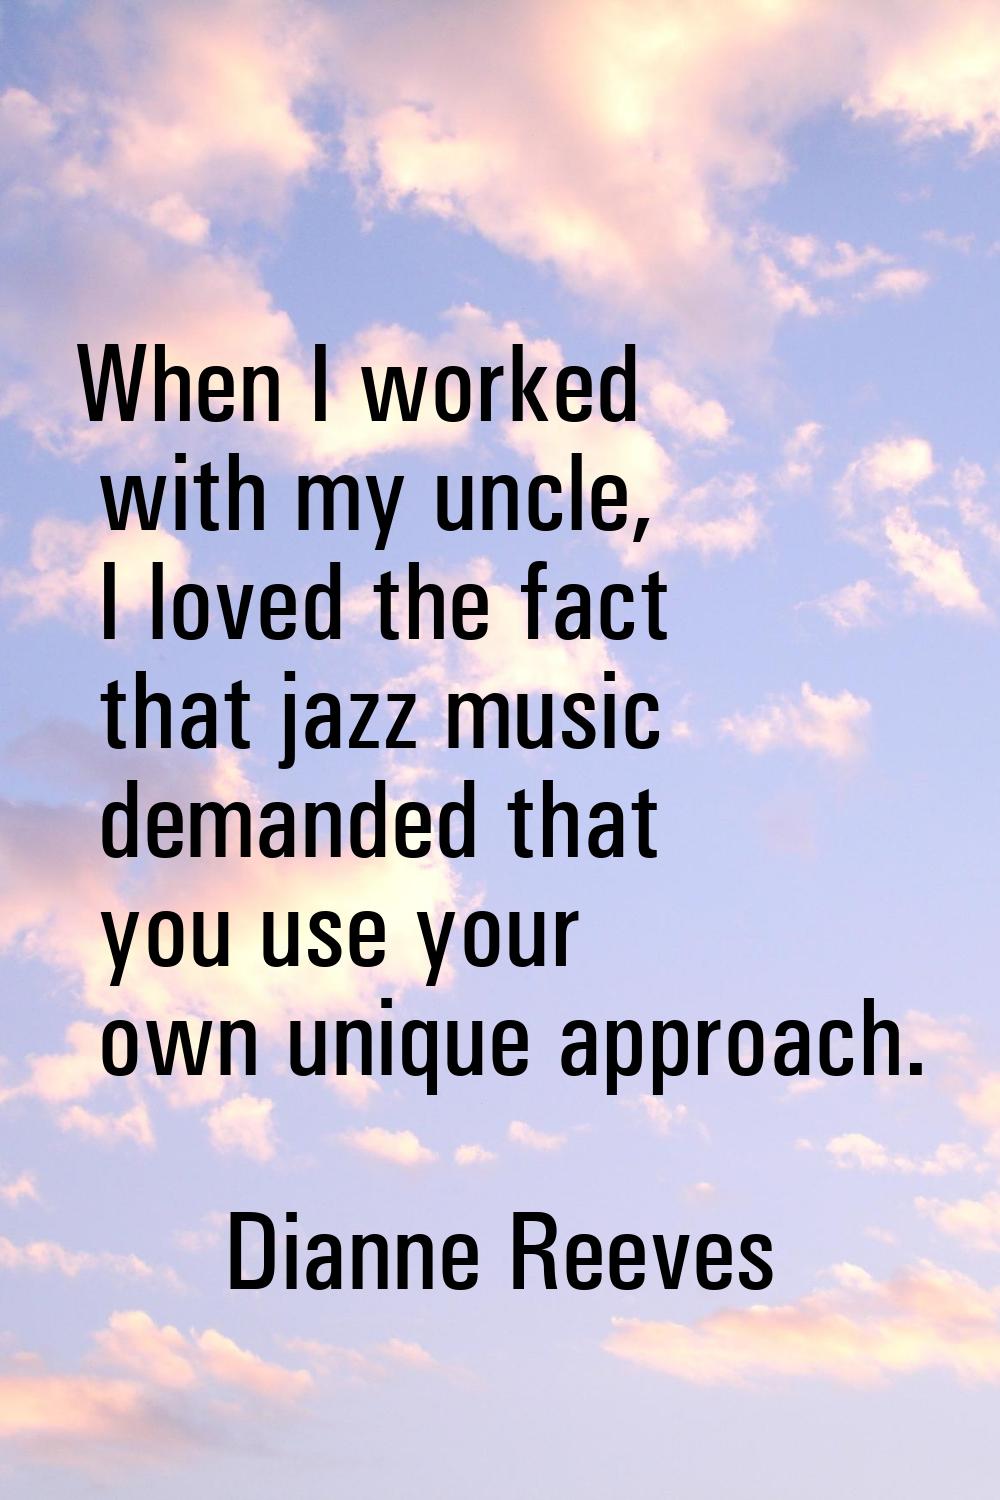 When I worked with my uncle, I loved the fact that jazz music demanded that you use your own unique